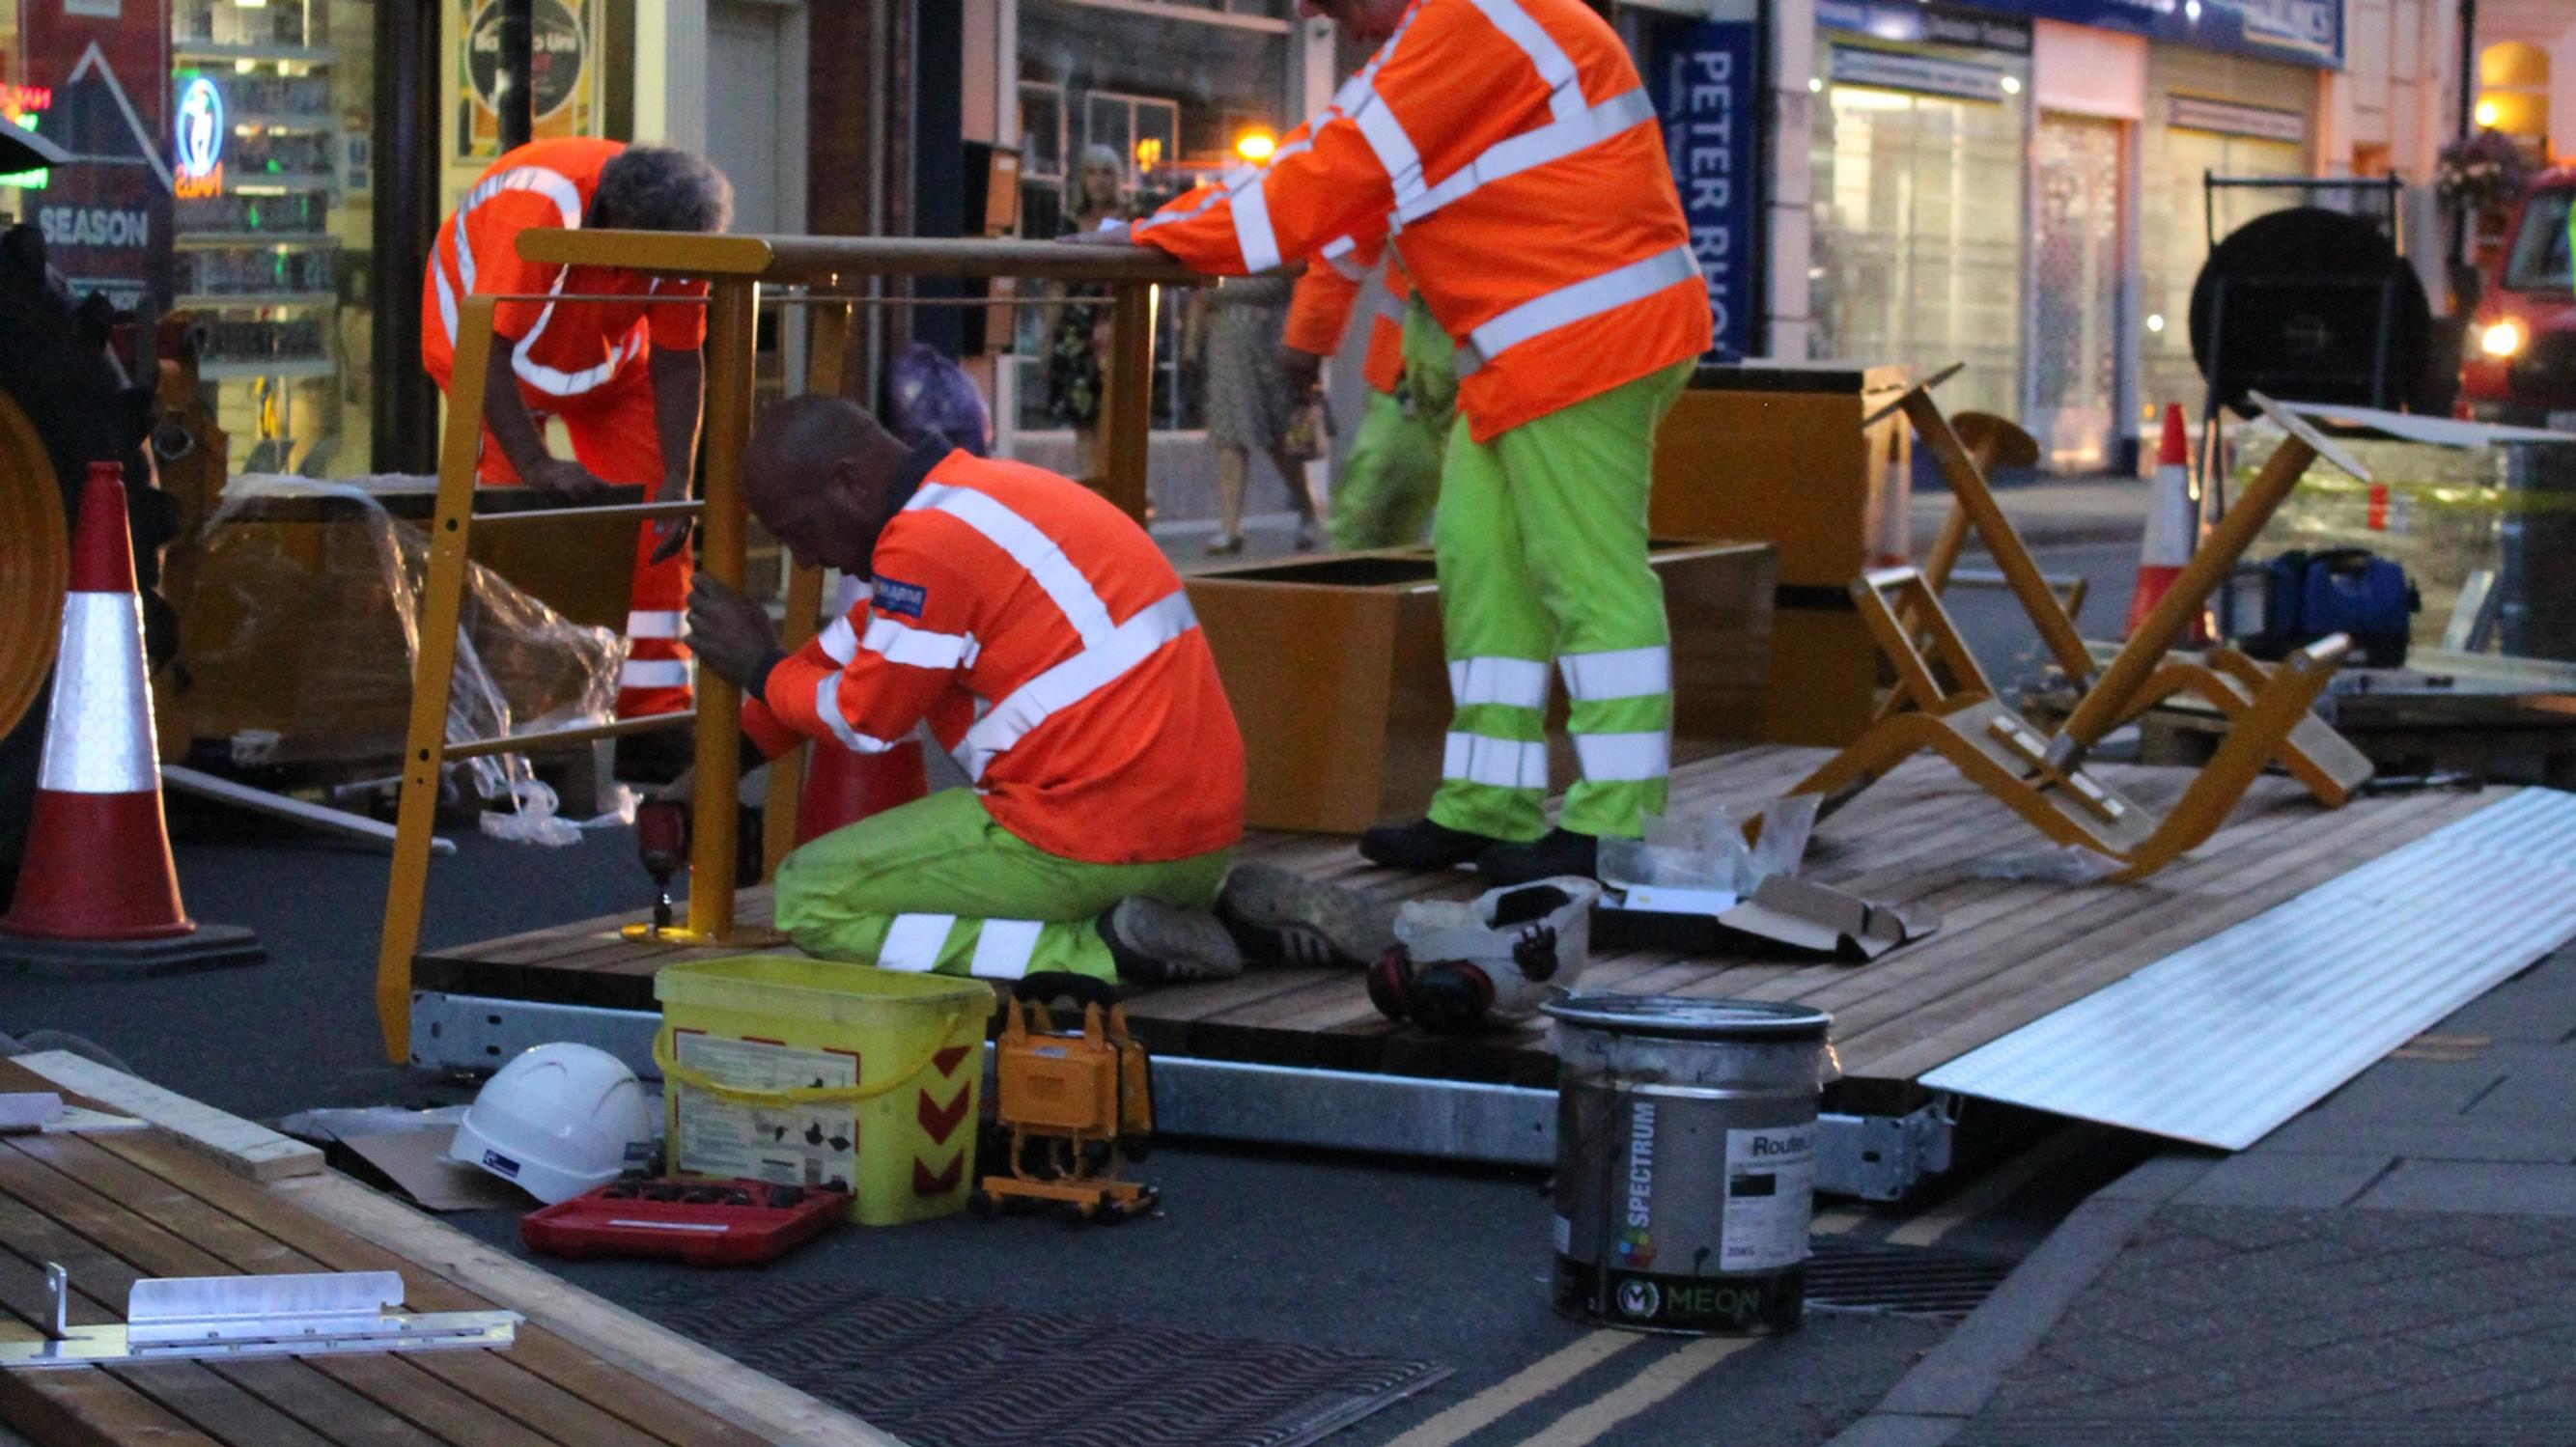 A team removing one of the parklets